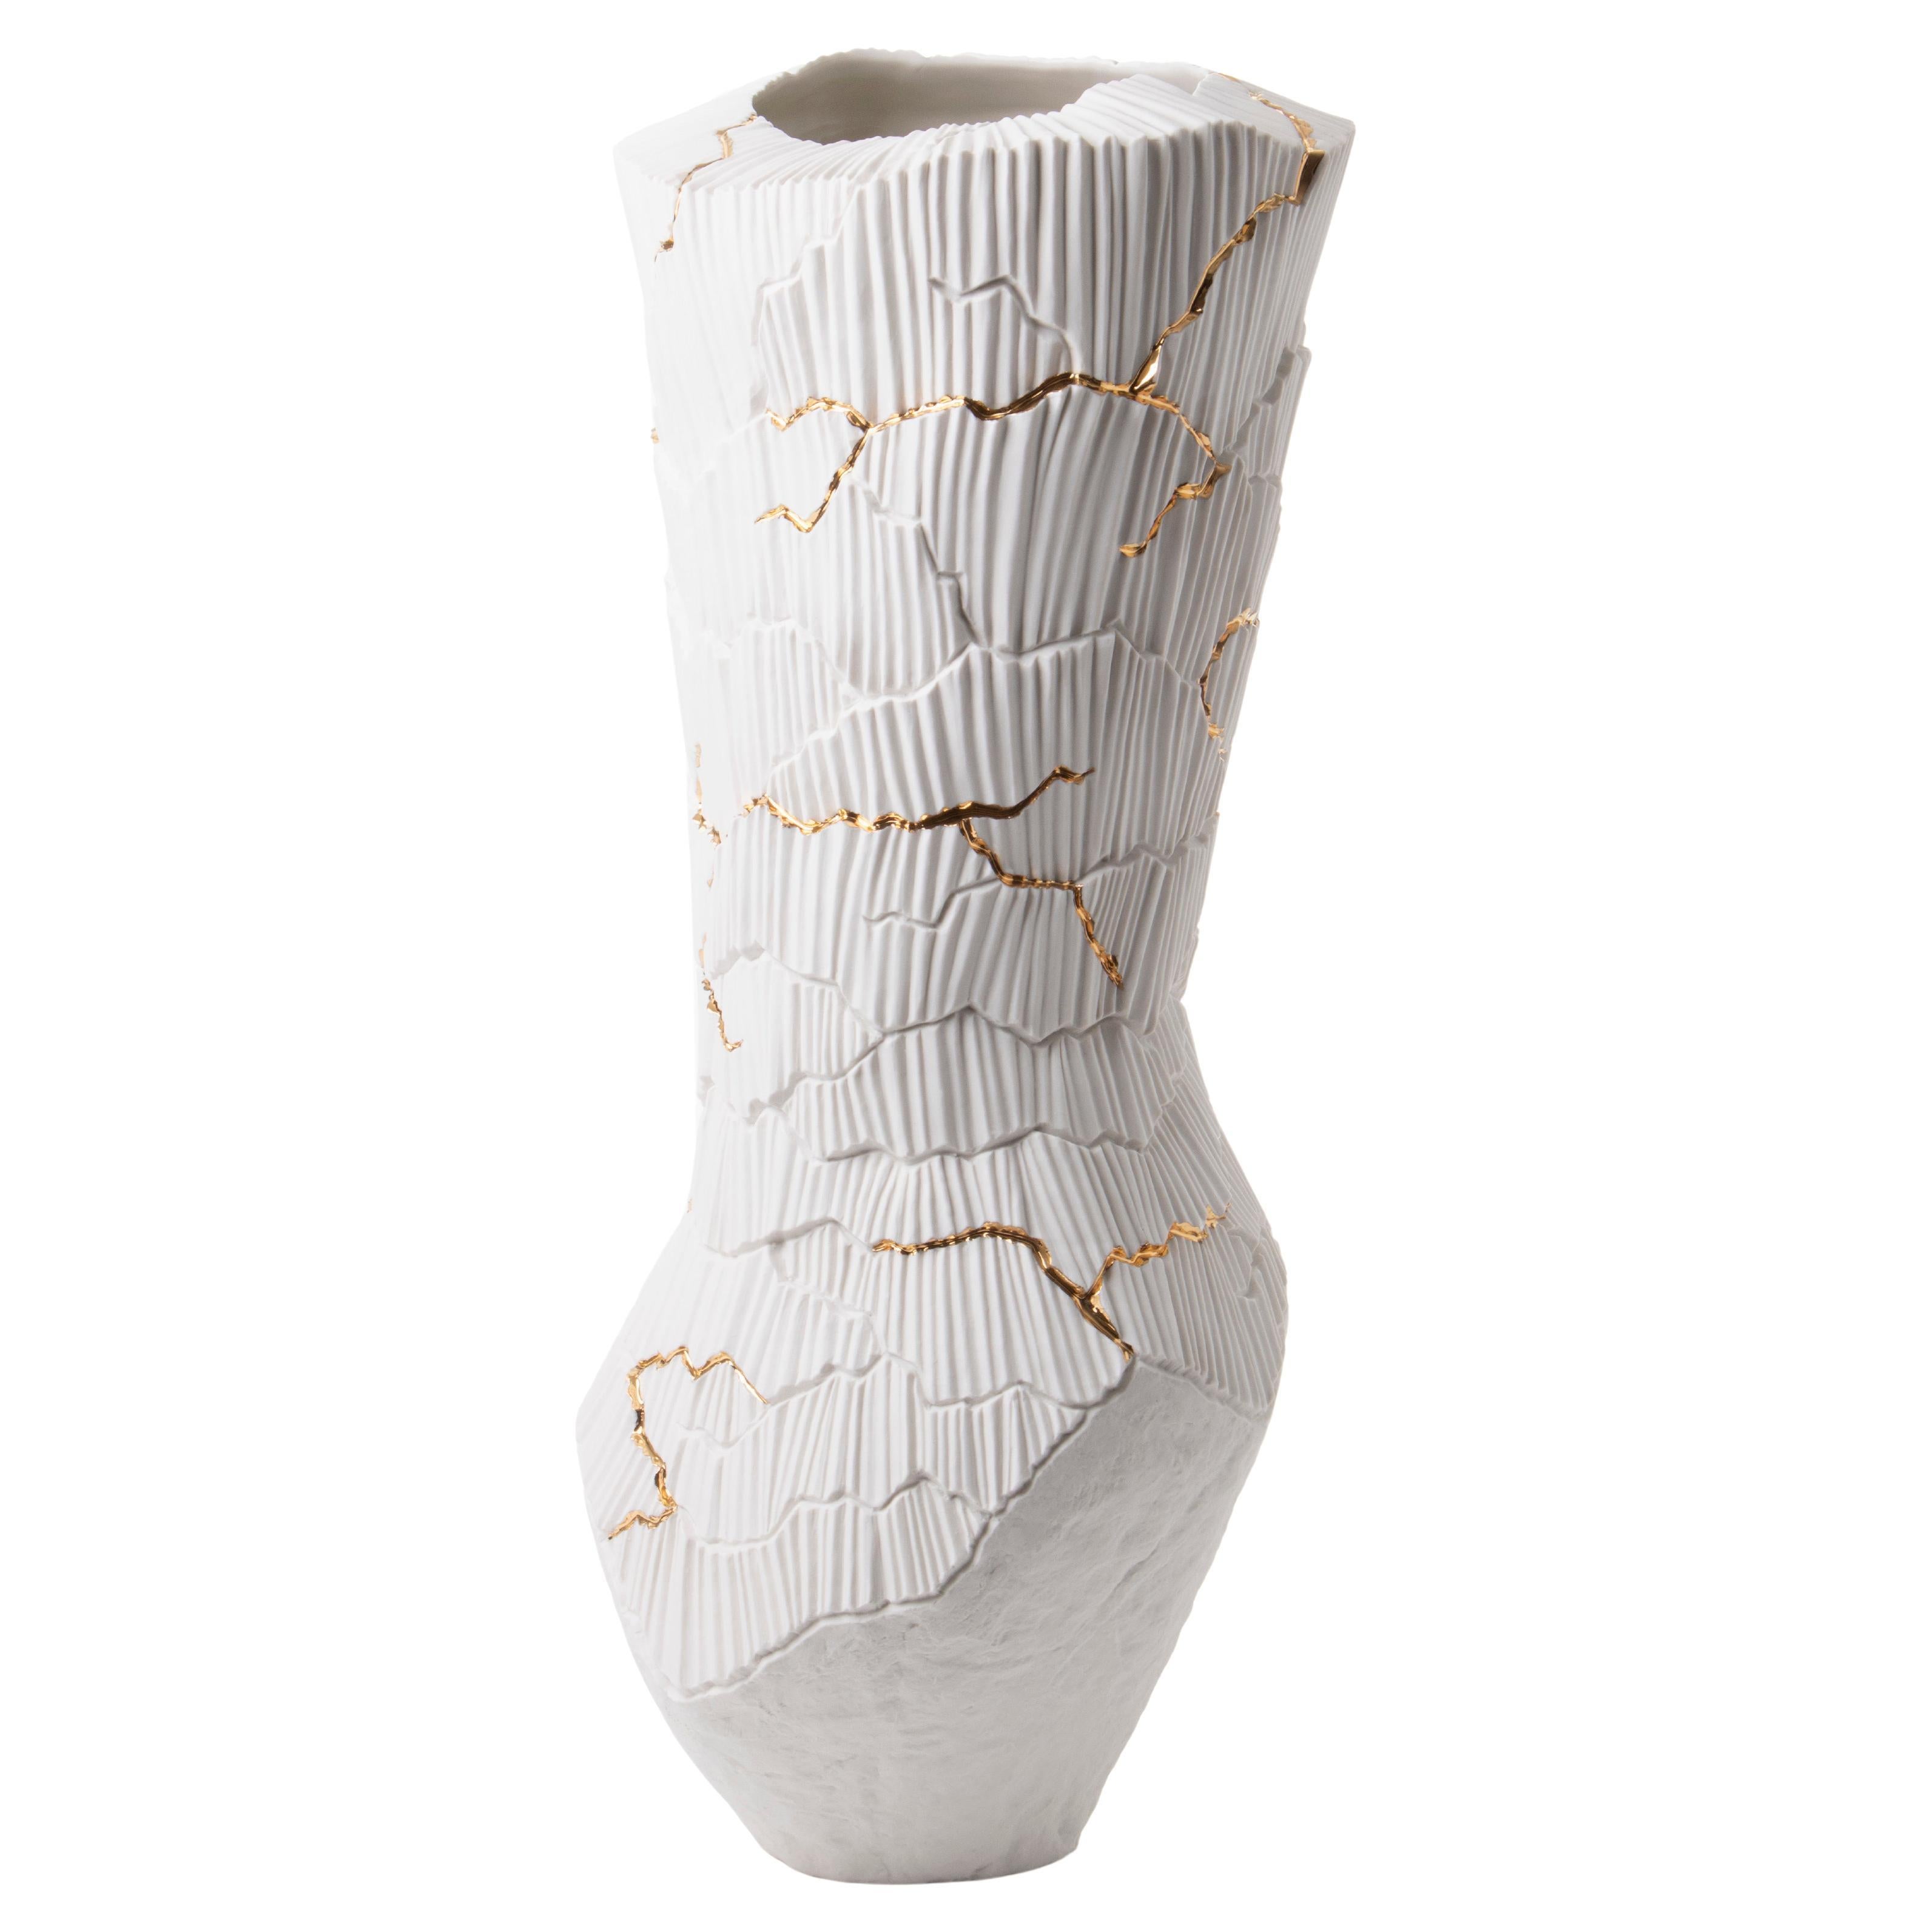 Contemporary Porcelain Tall Vase White Gold Kintsugi Ceramic Hand-Painted Fos